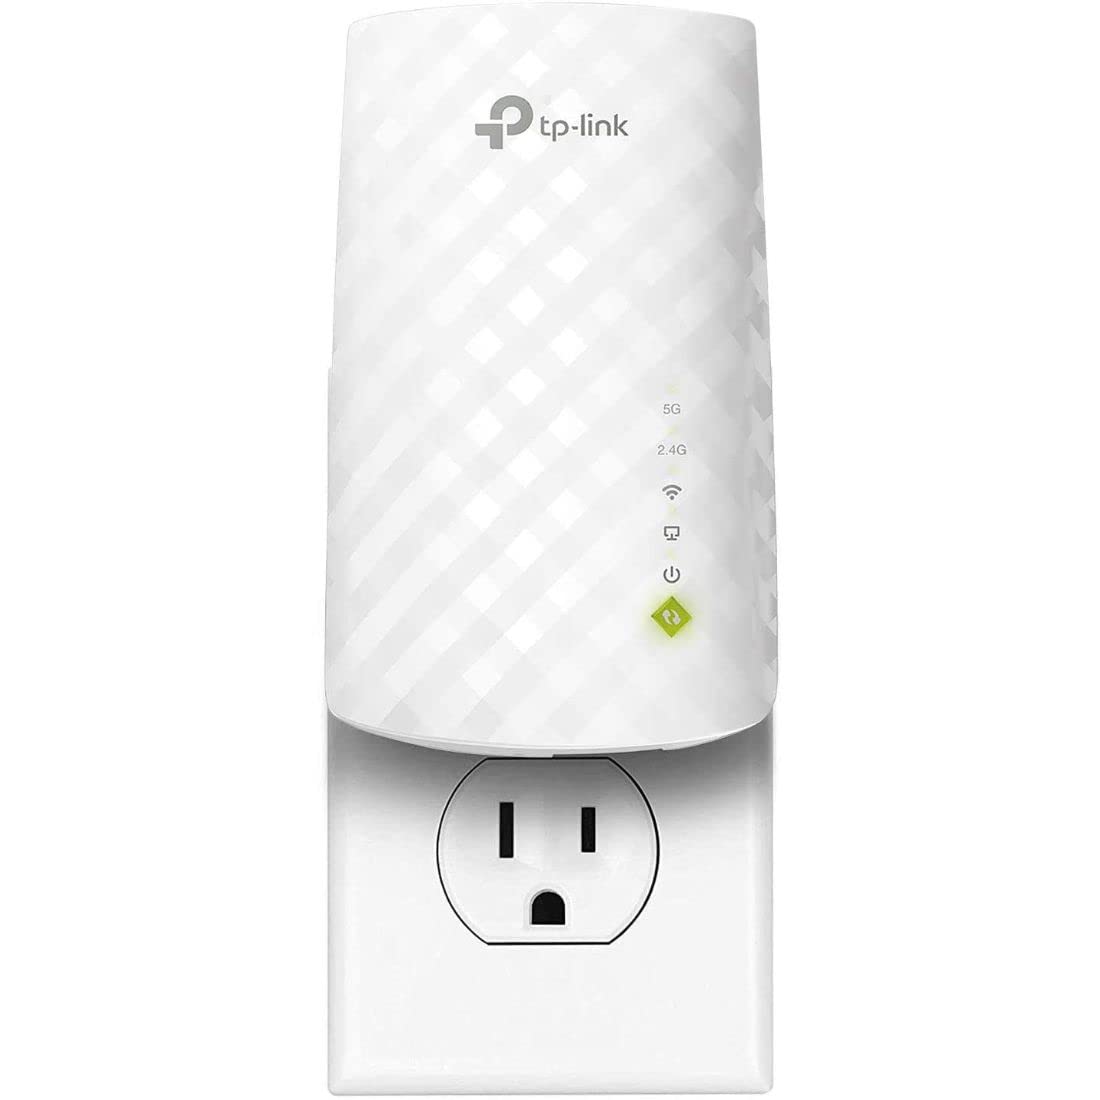 TP-Link WiFi Extender with Ethernet Port (RE220) $14.99